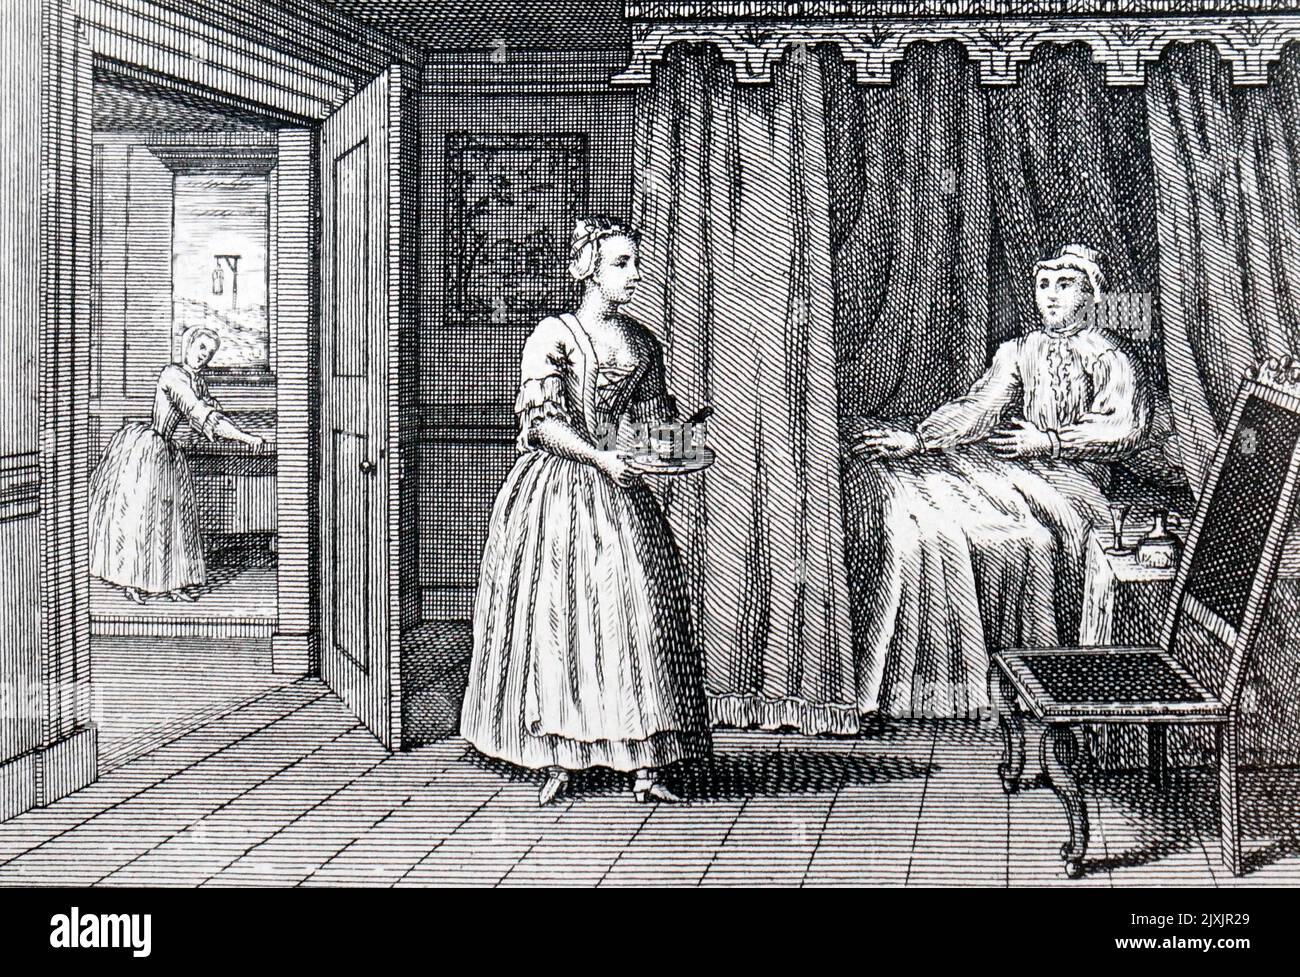 Illustration titled 'murder by poison' depicting a young wife murdering her old husband so that she may marry her younger lover. Dated 18th Century Stock Photo